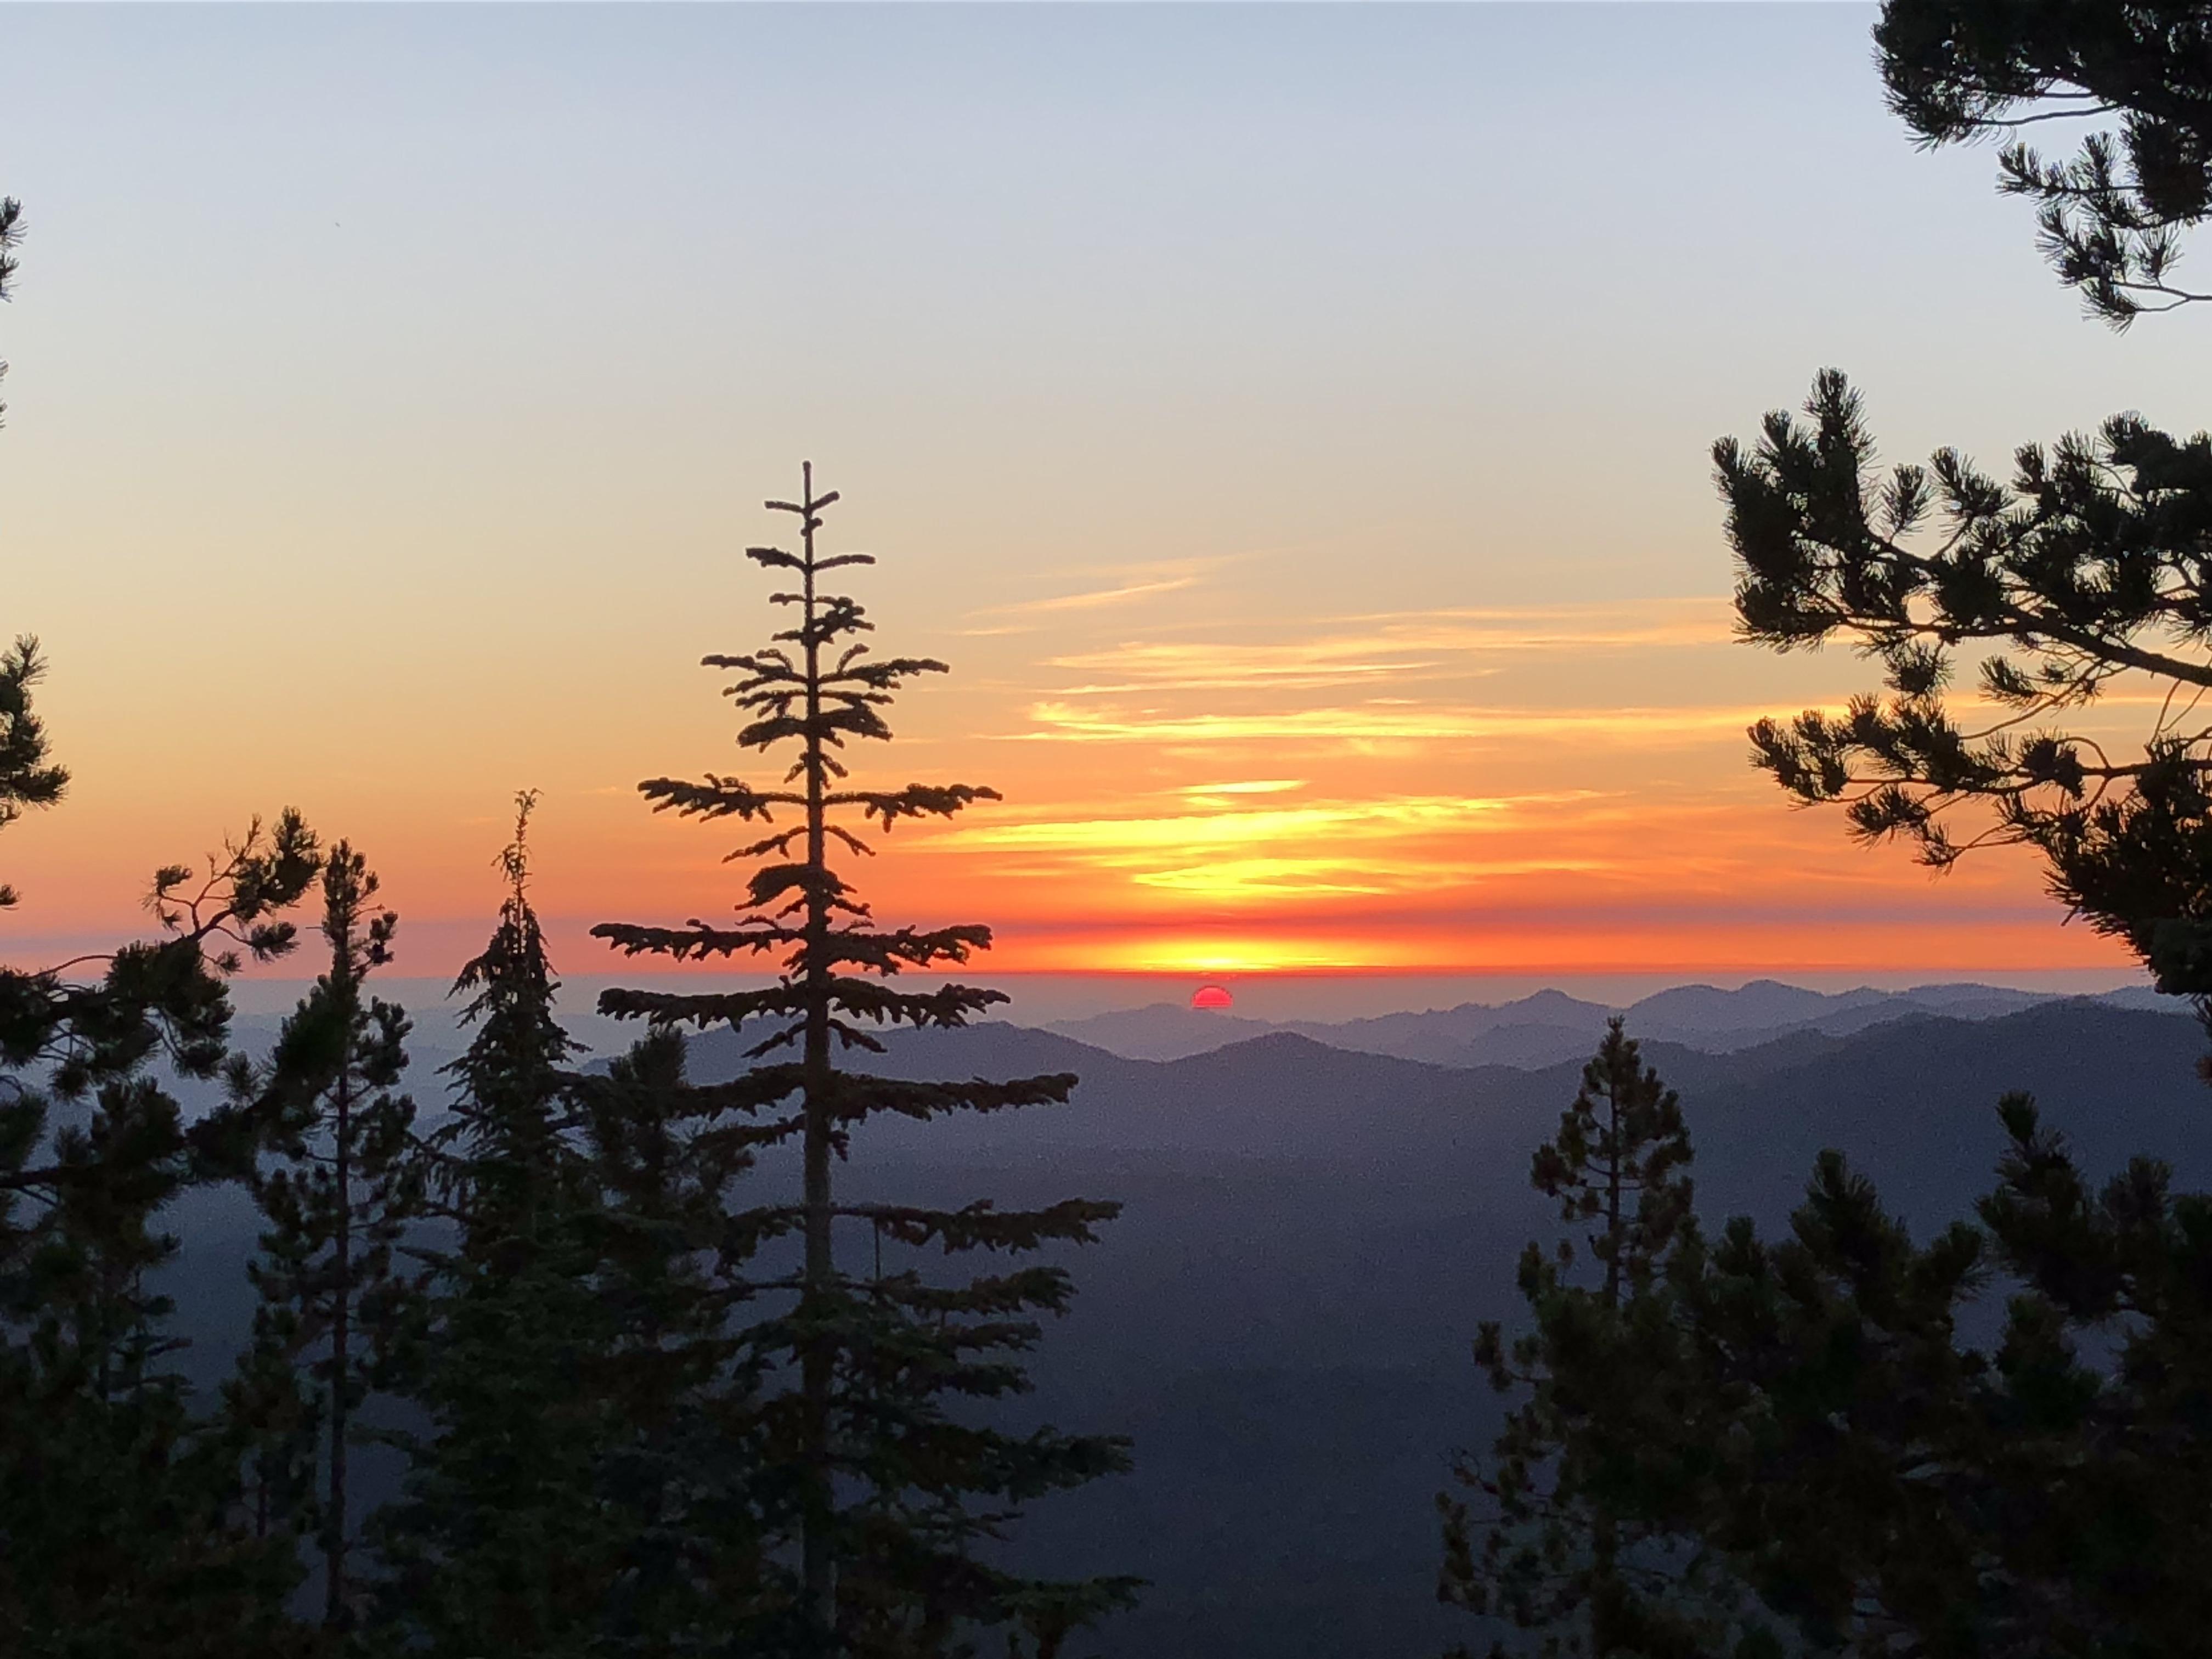 Sunset view from Cinnamon Butte